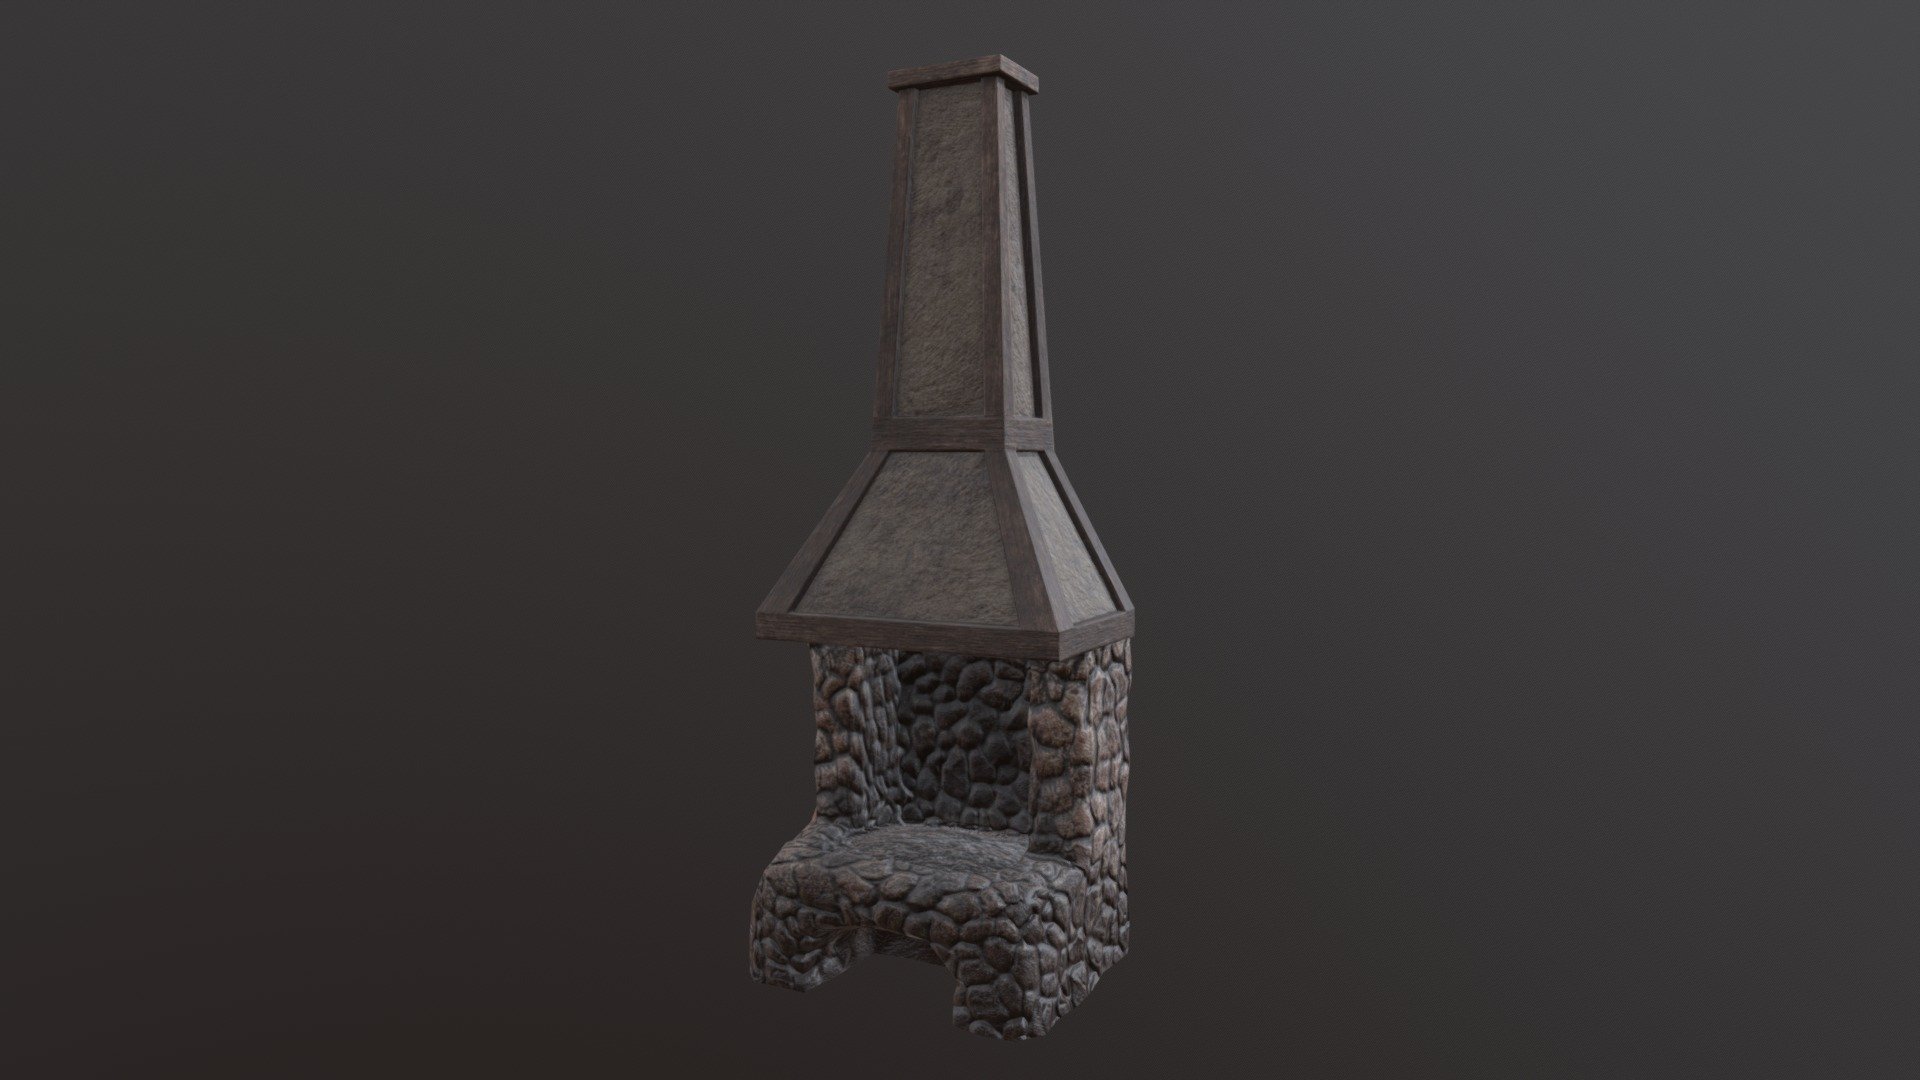 Asset for a blacksmith project 3d model